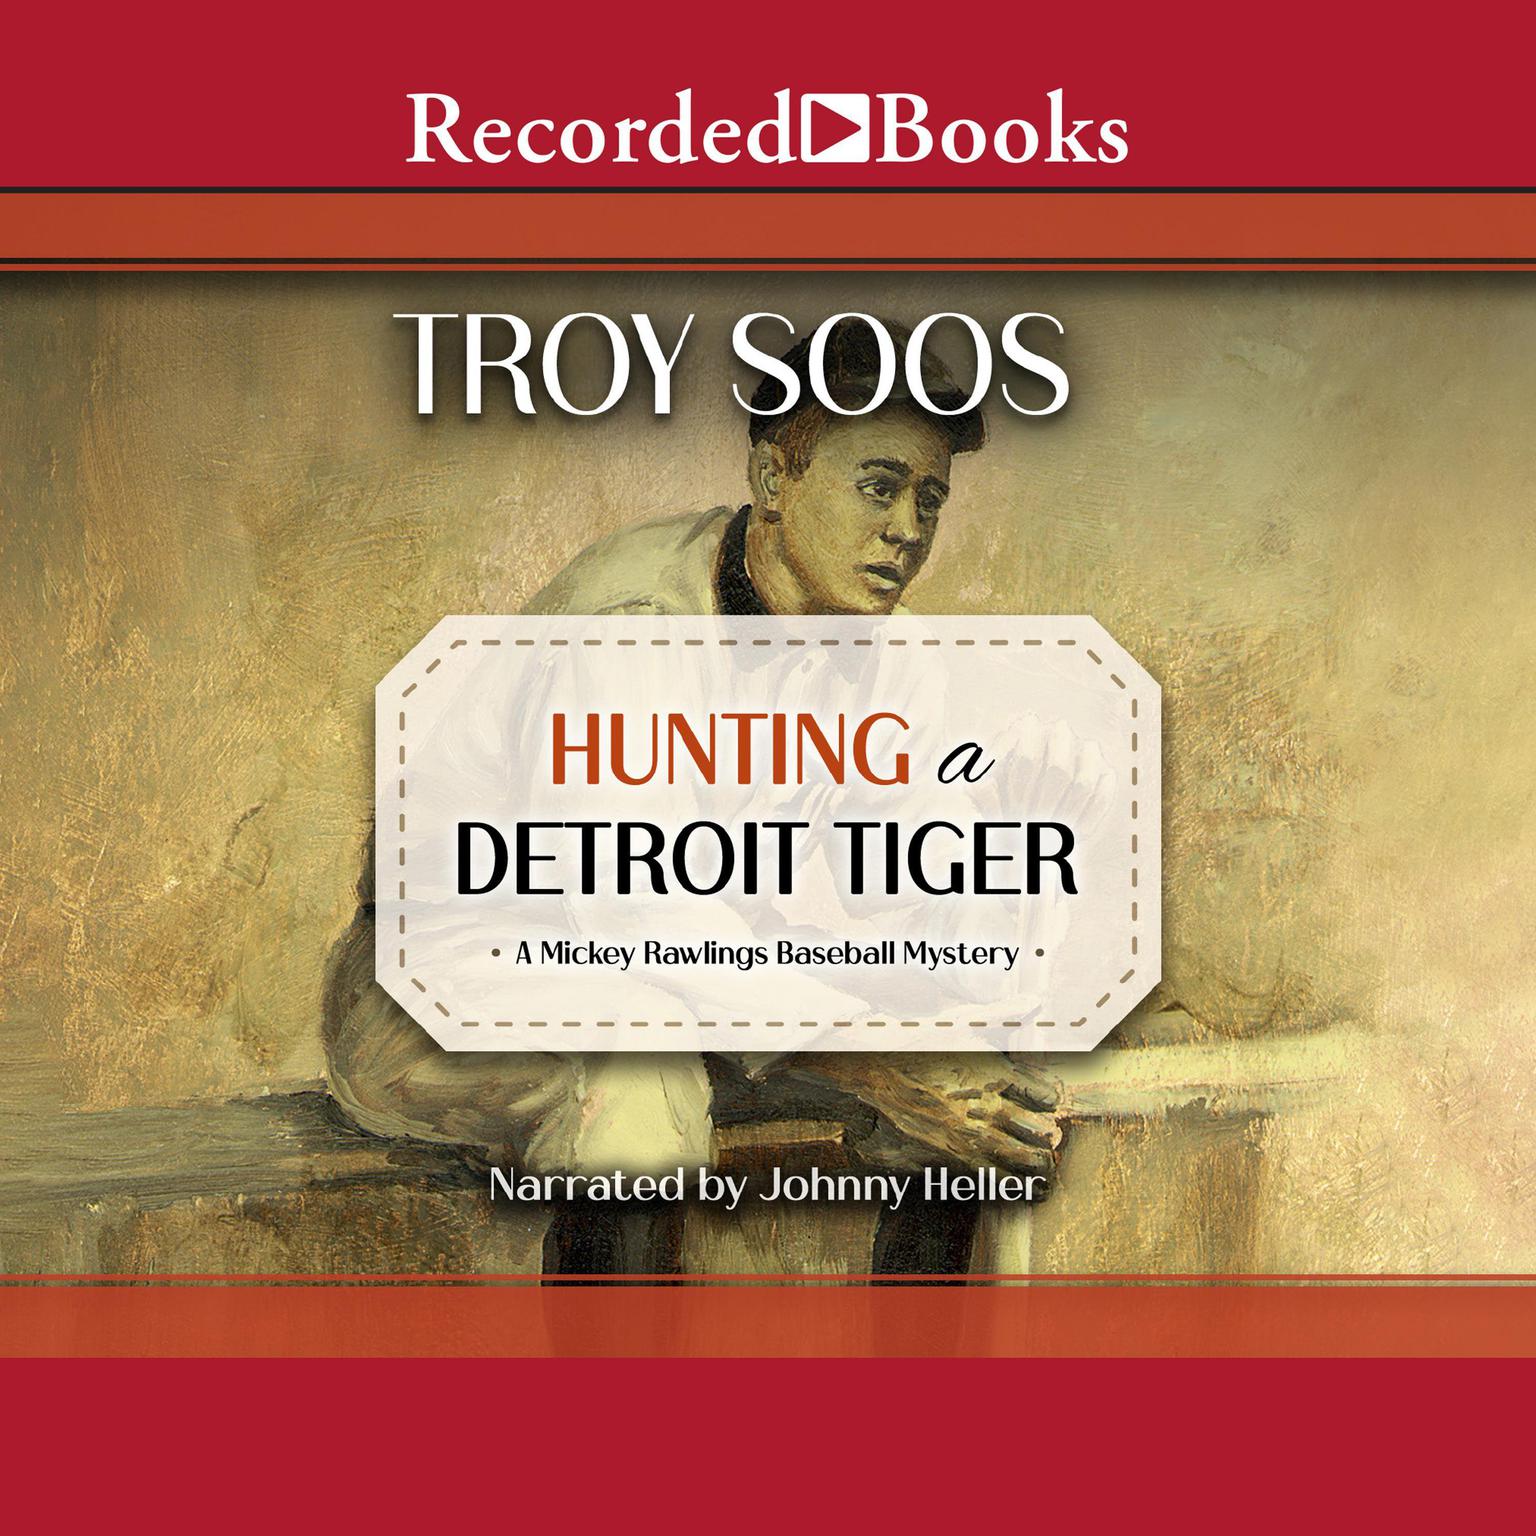 Hunting a Detroit Tiger Audiobook, by Troy Soos